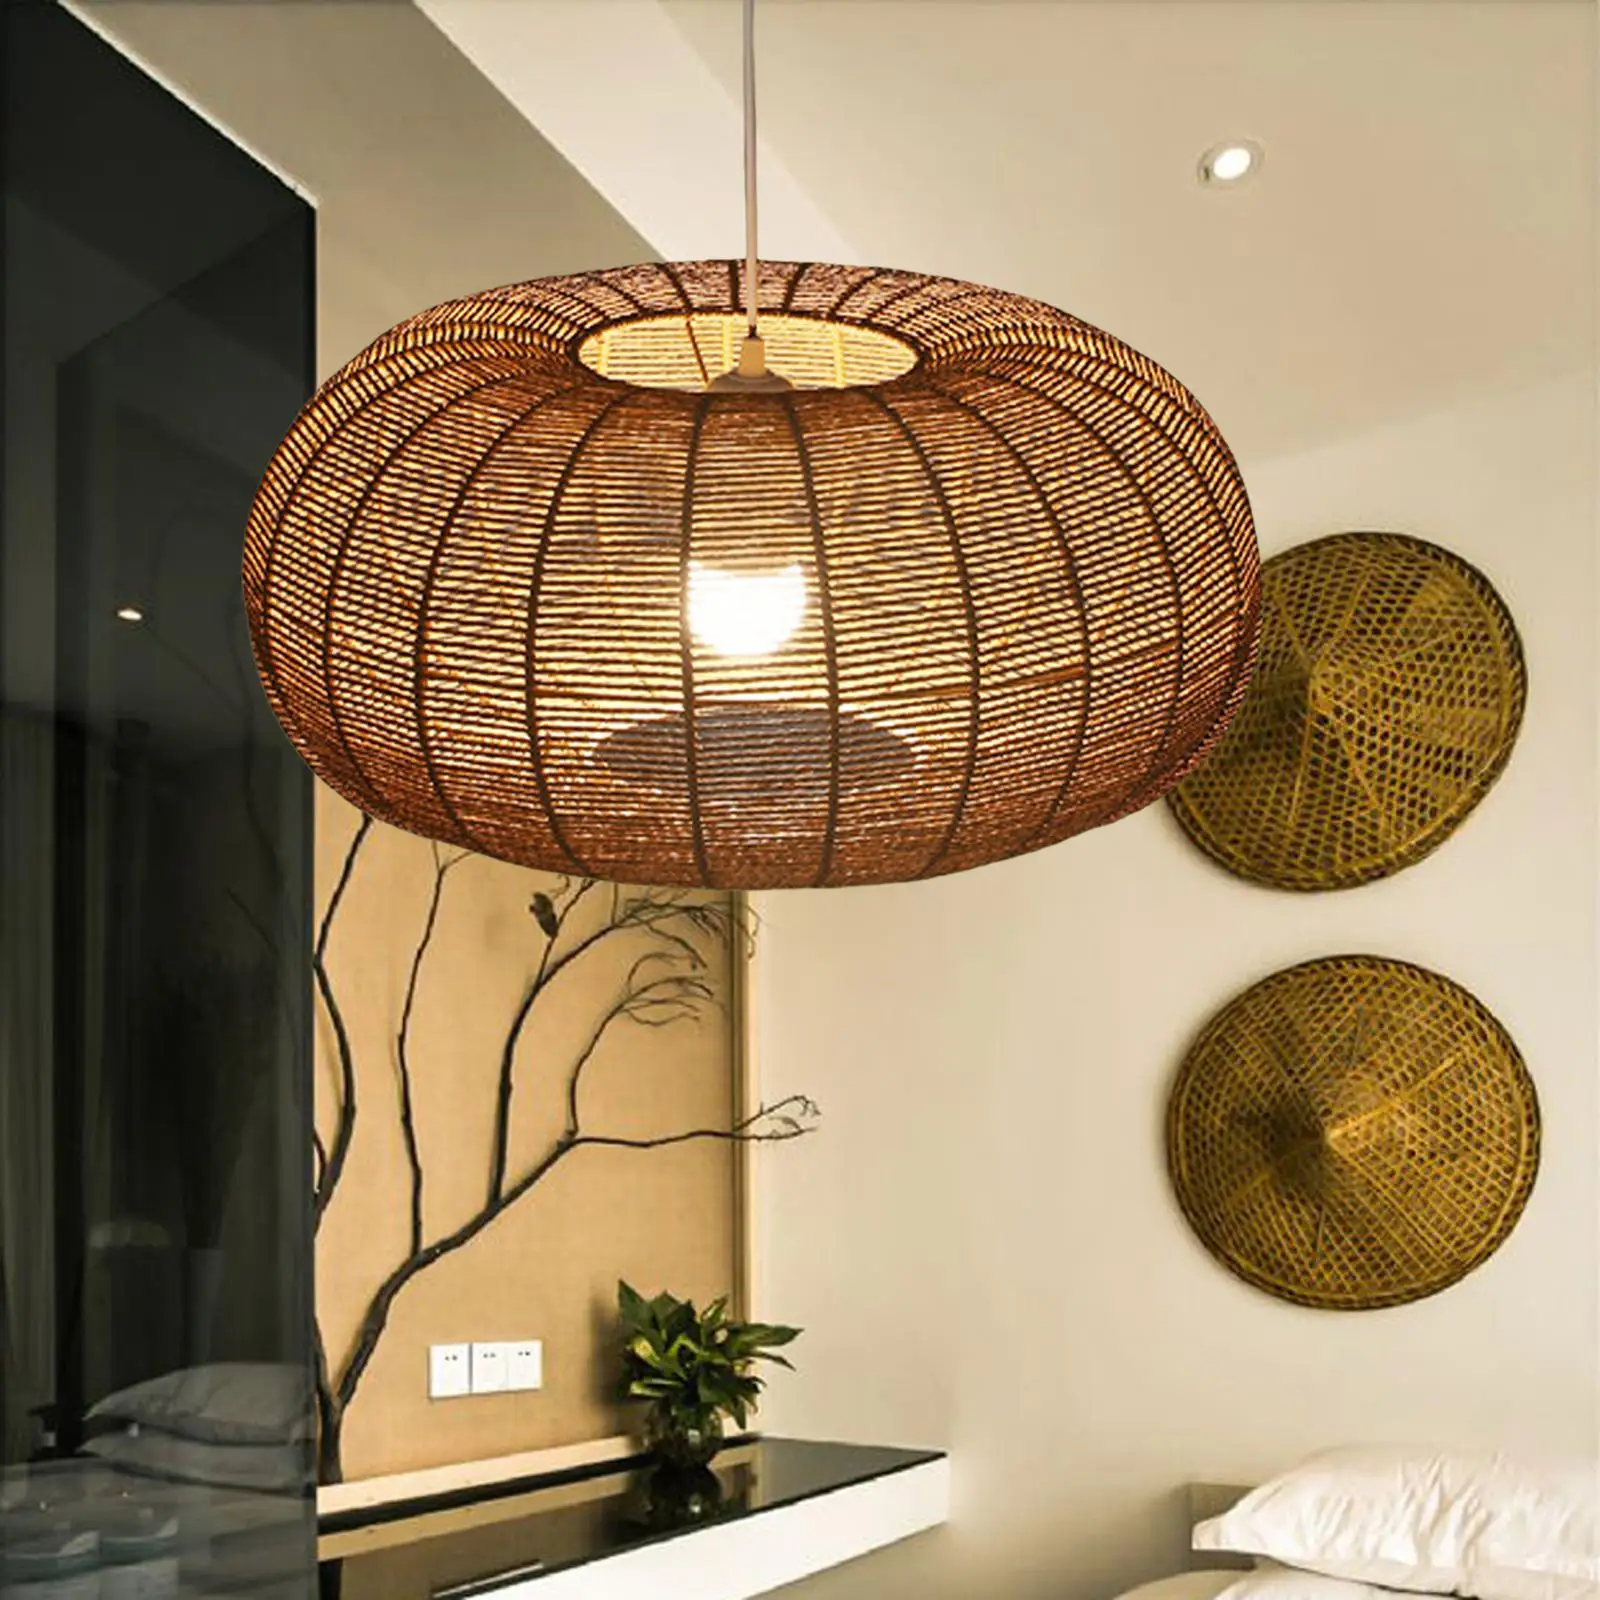 Nordic Style Pendant Lamp Shade, Decoration Rope Ceiling Light Shade Woven Chandelier Cover for Dining Room Kitchen restaurant